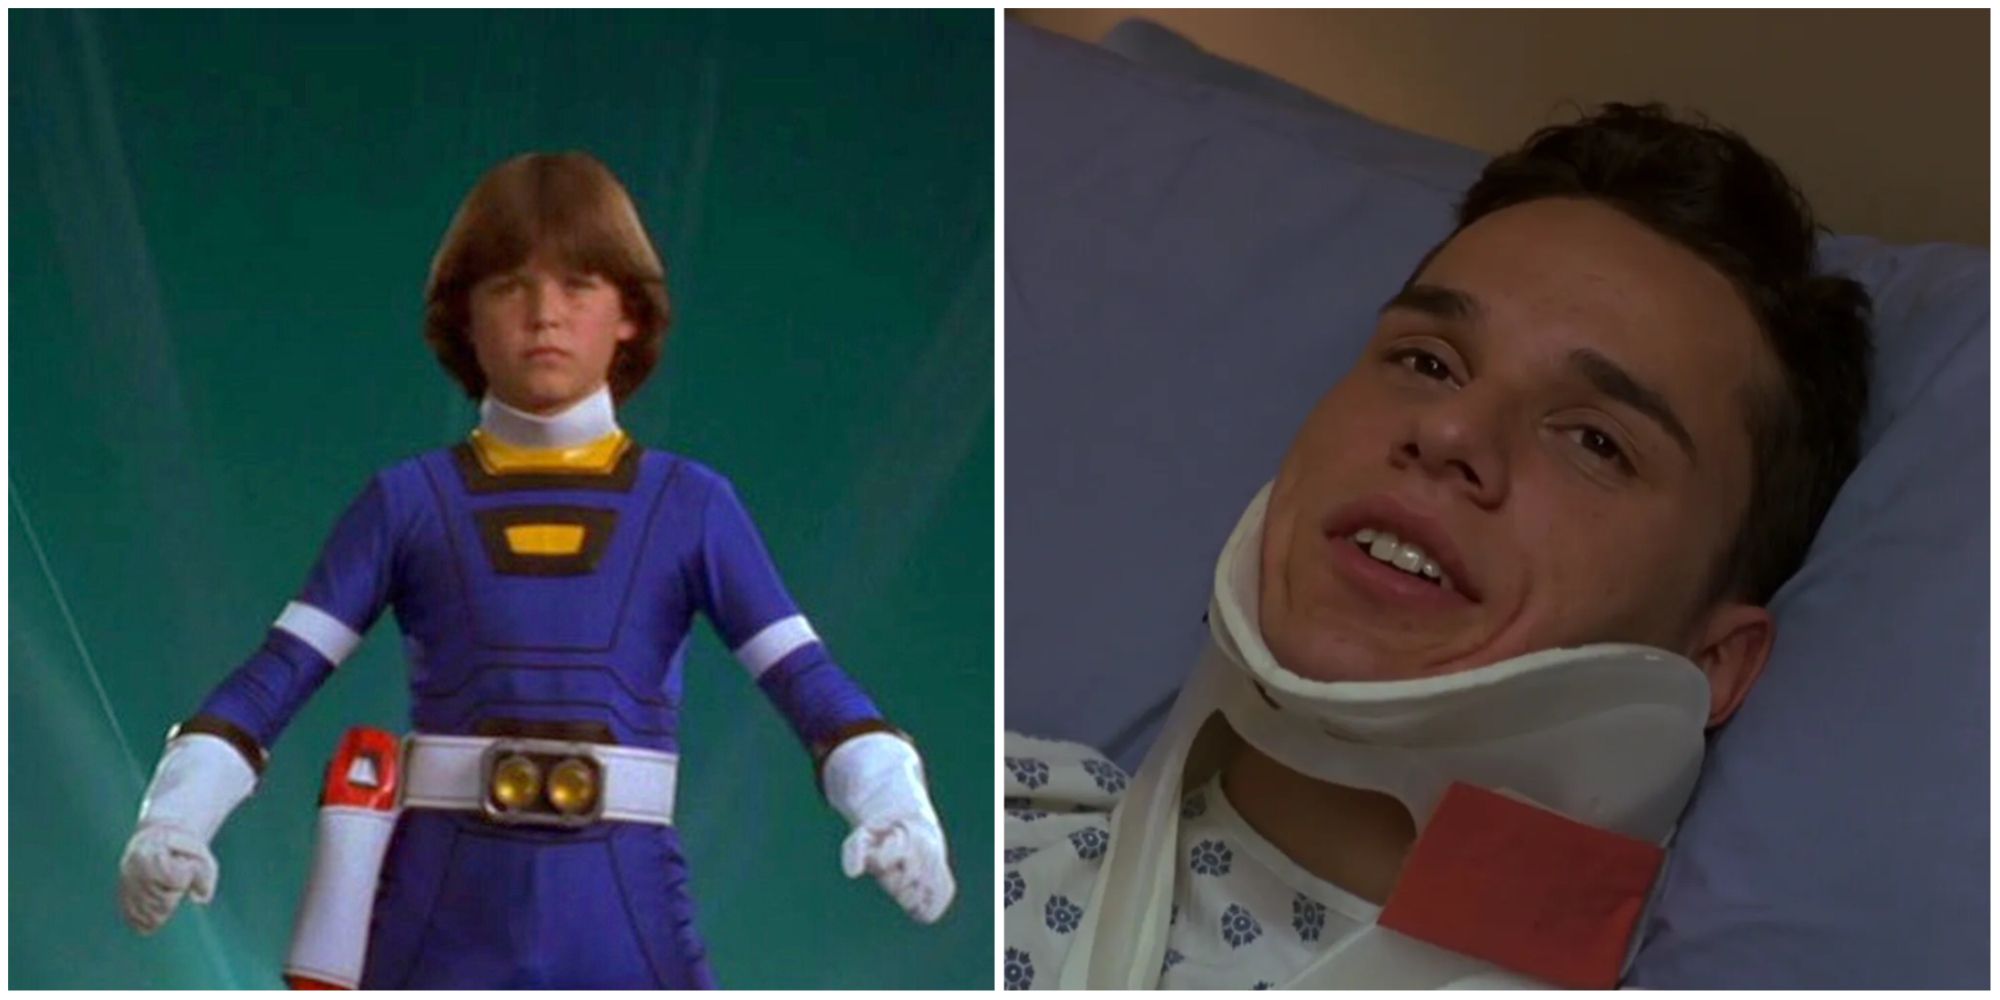 Rocky injured in a neck brace and Justin standing in the Blue Turbo uniform